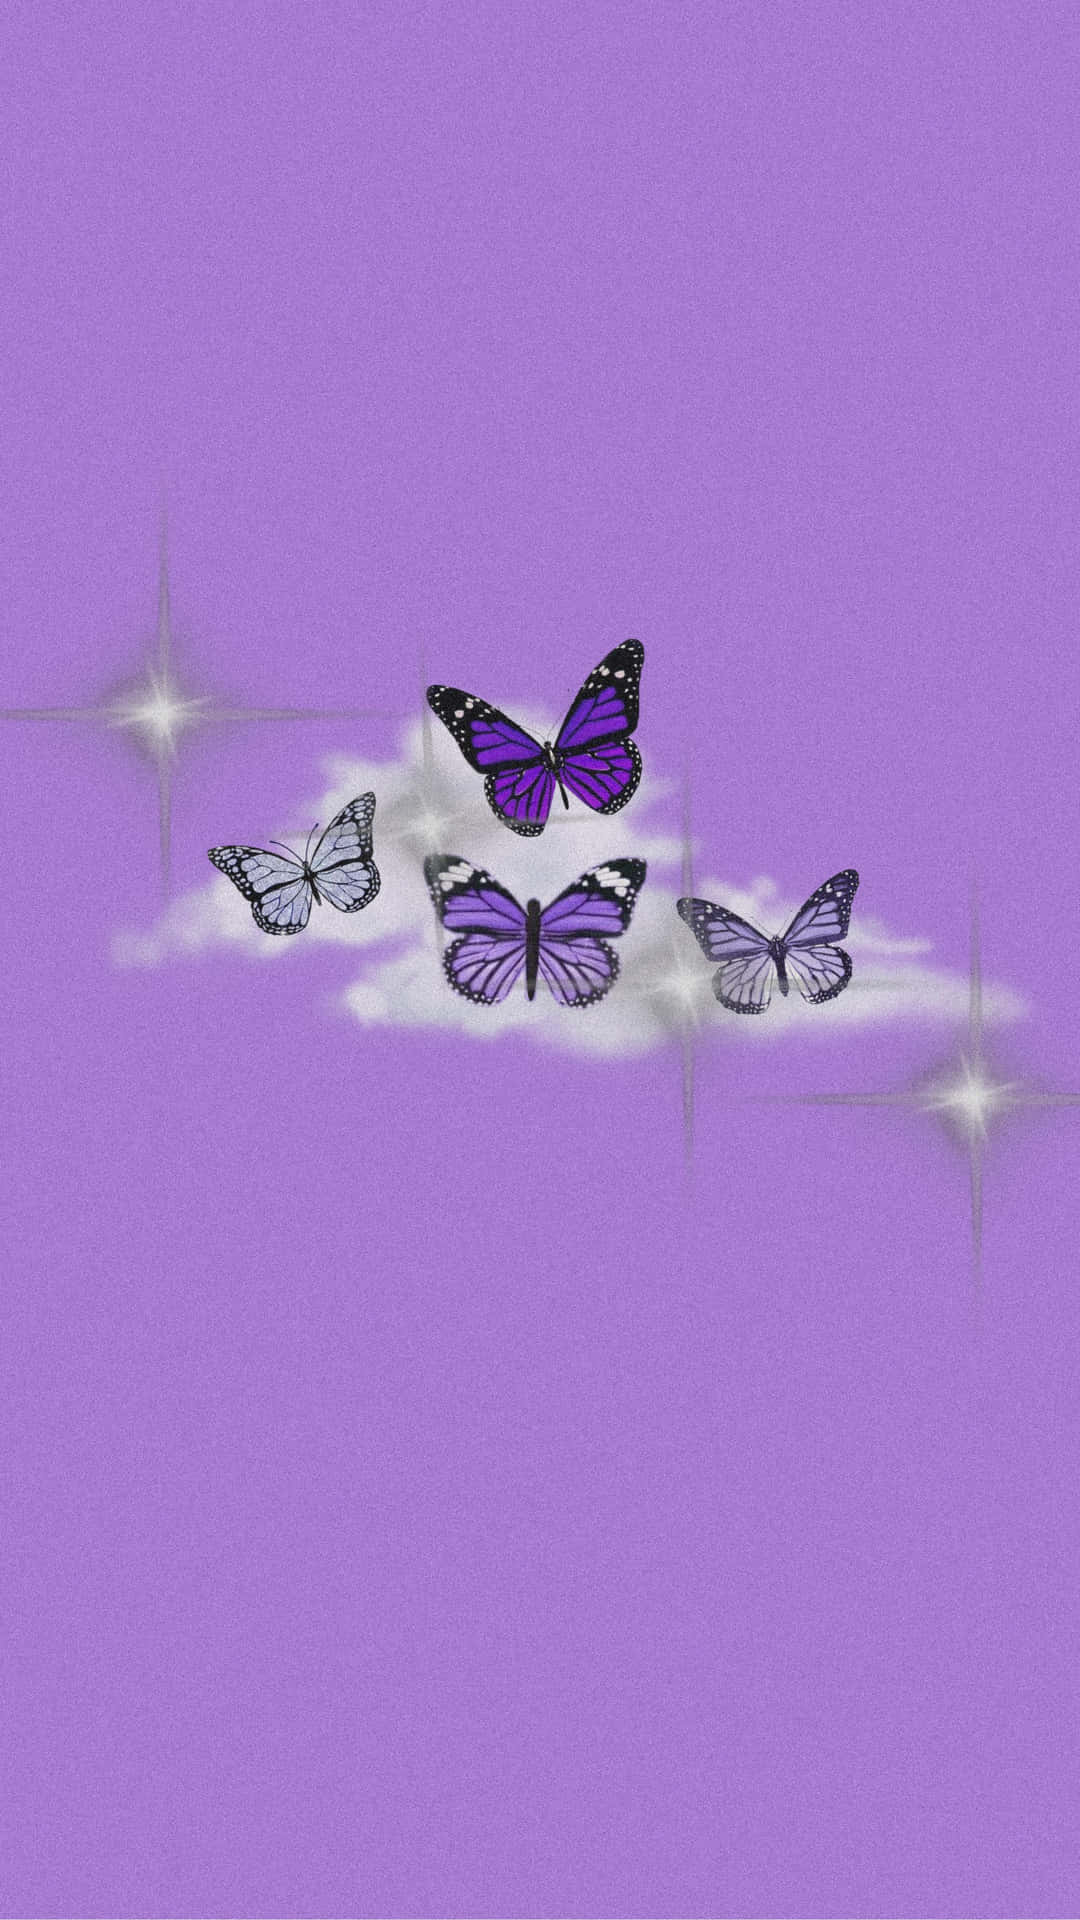 Butterfly iPhone wallpaper by ickyearl on DeviantArt